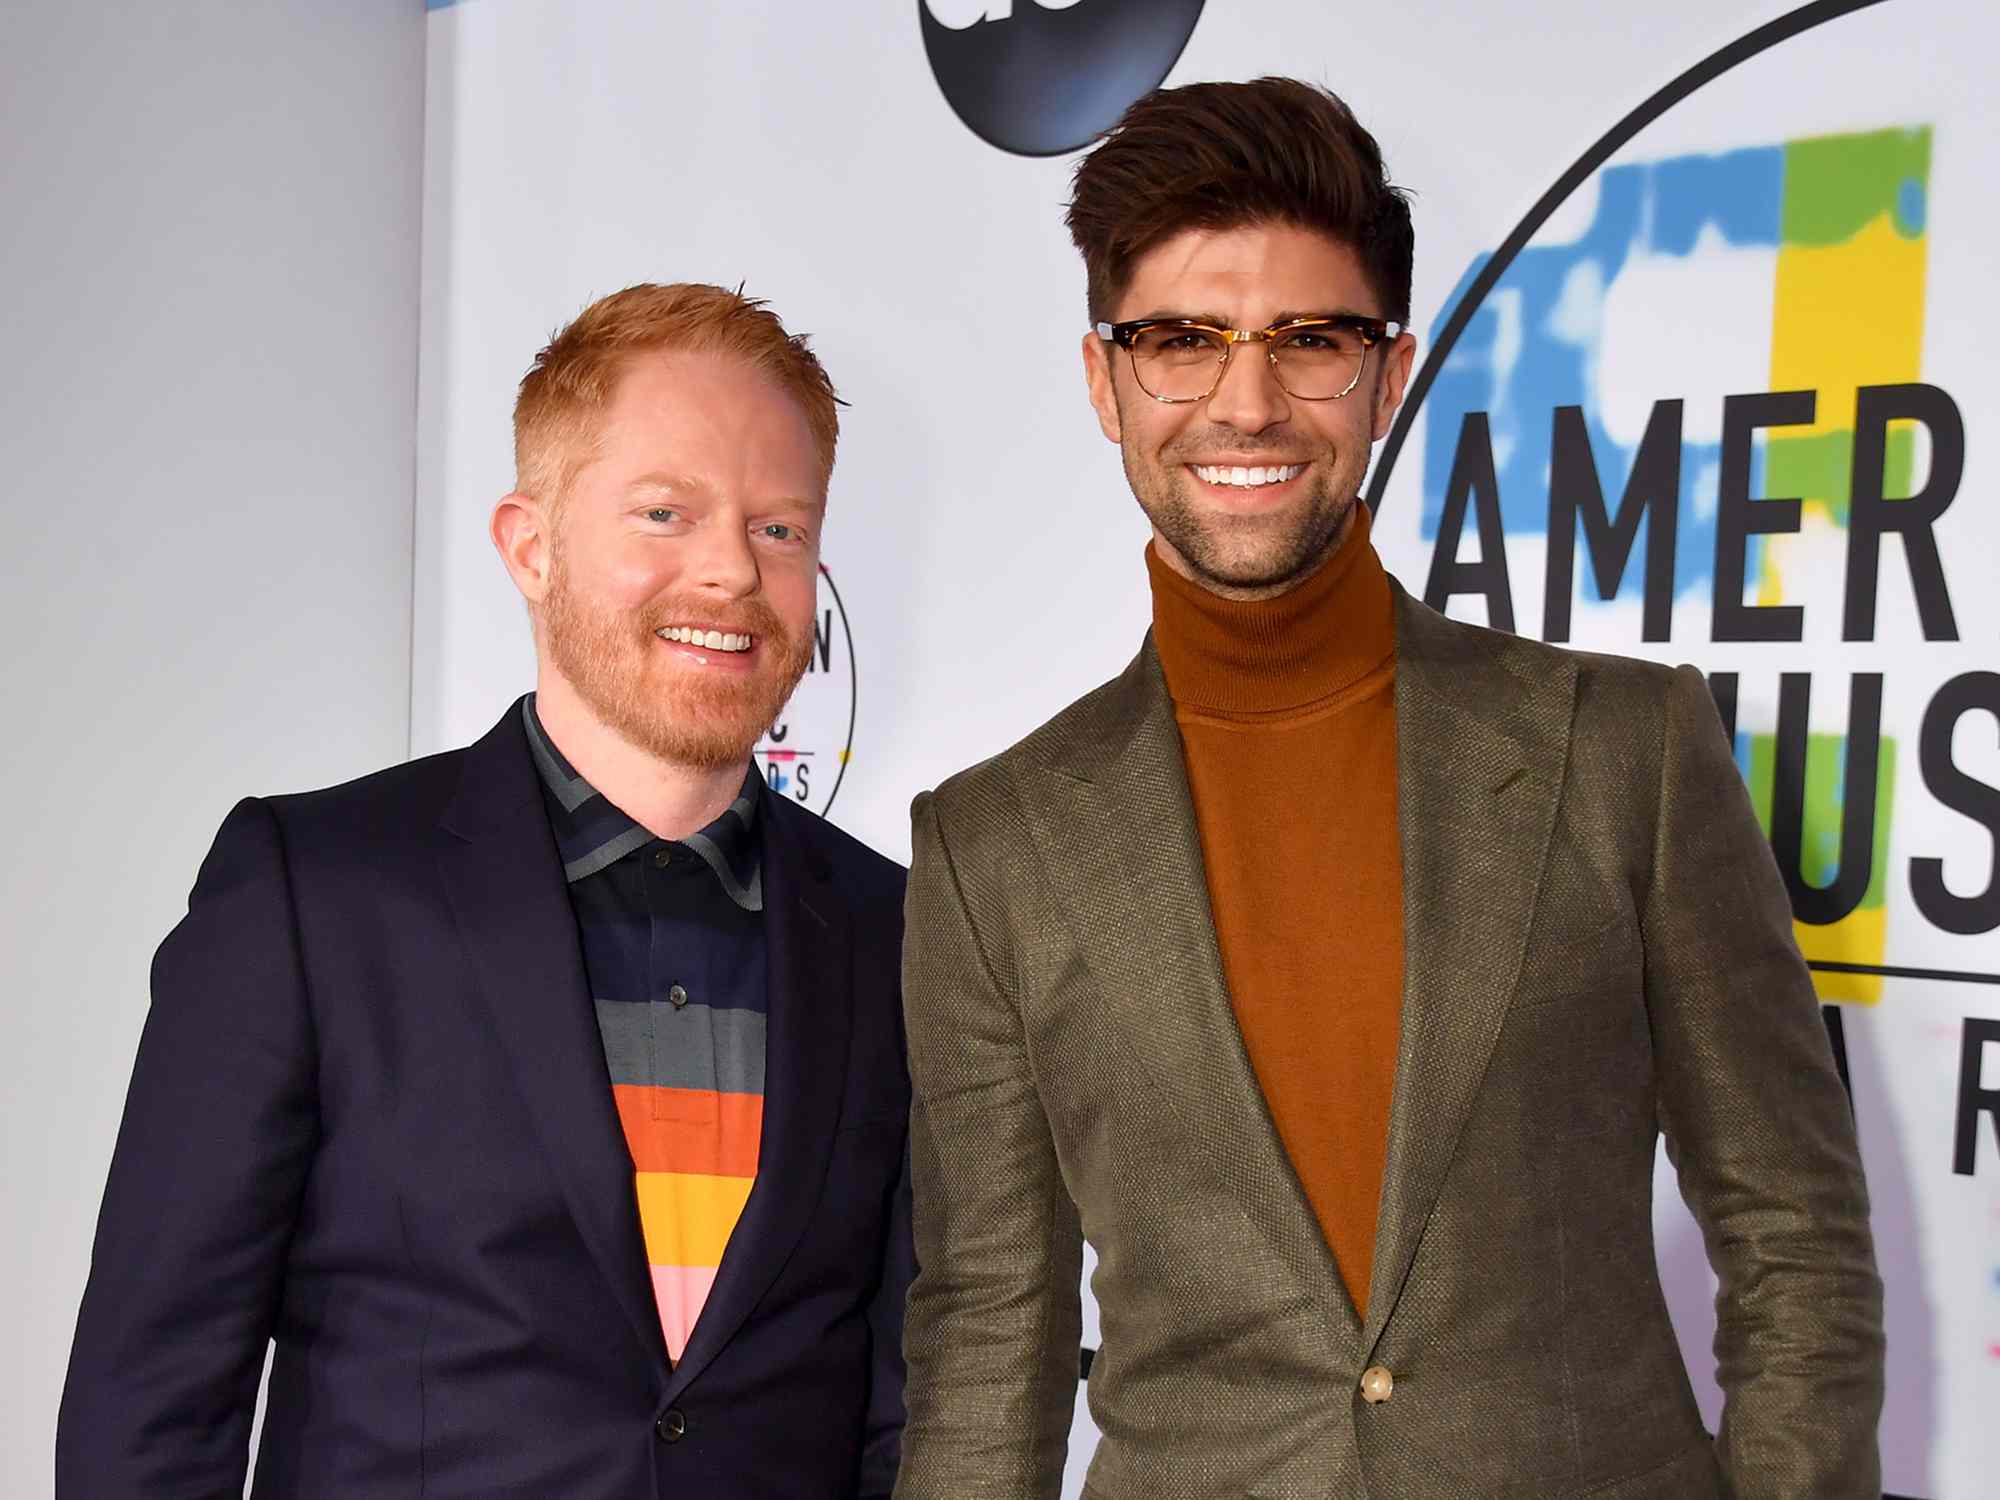 Jesse Tyler Ferguson (L) and Justin Mikita attend the 2017 American Music Awards at Microsoft Theater on November 19, 2017 in Los Angeles, California